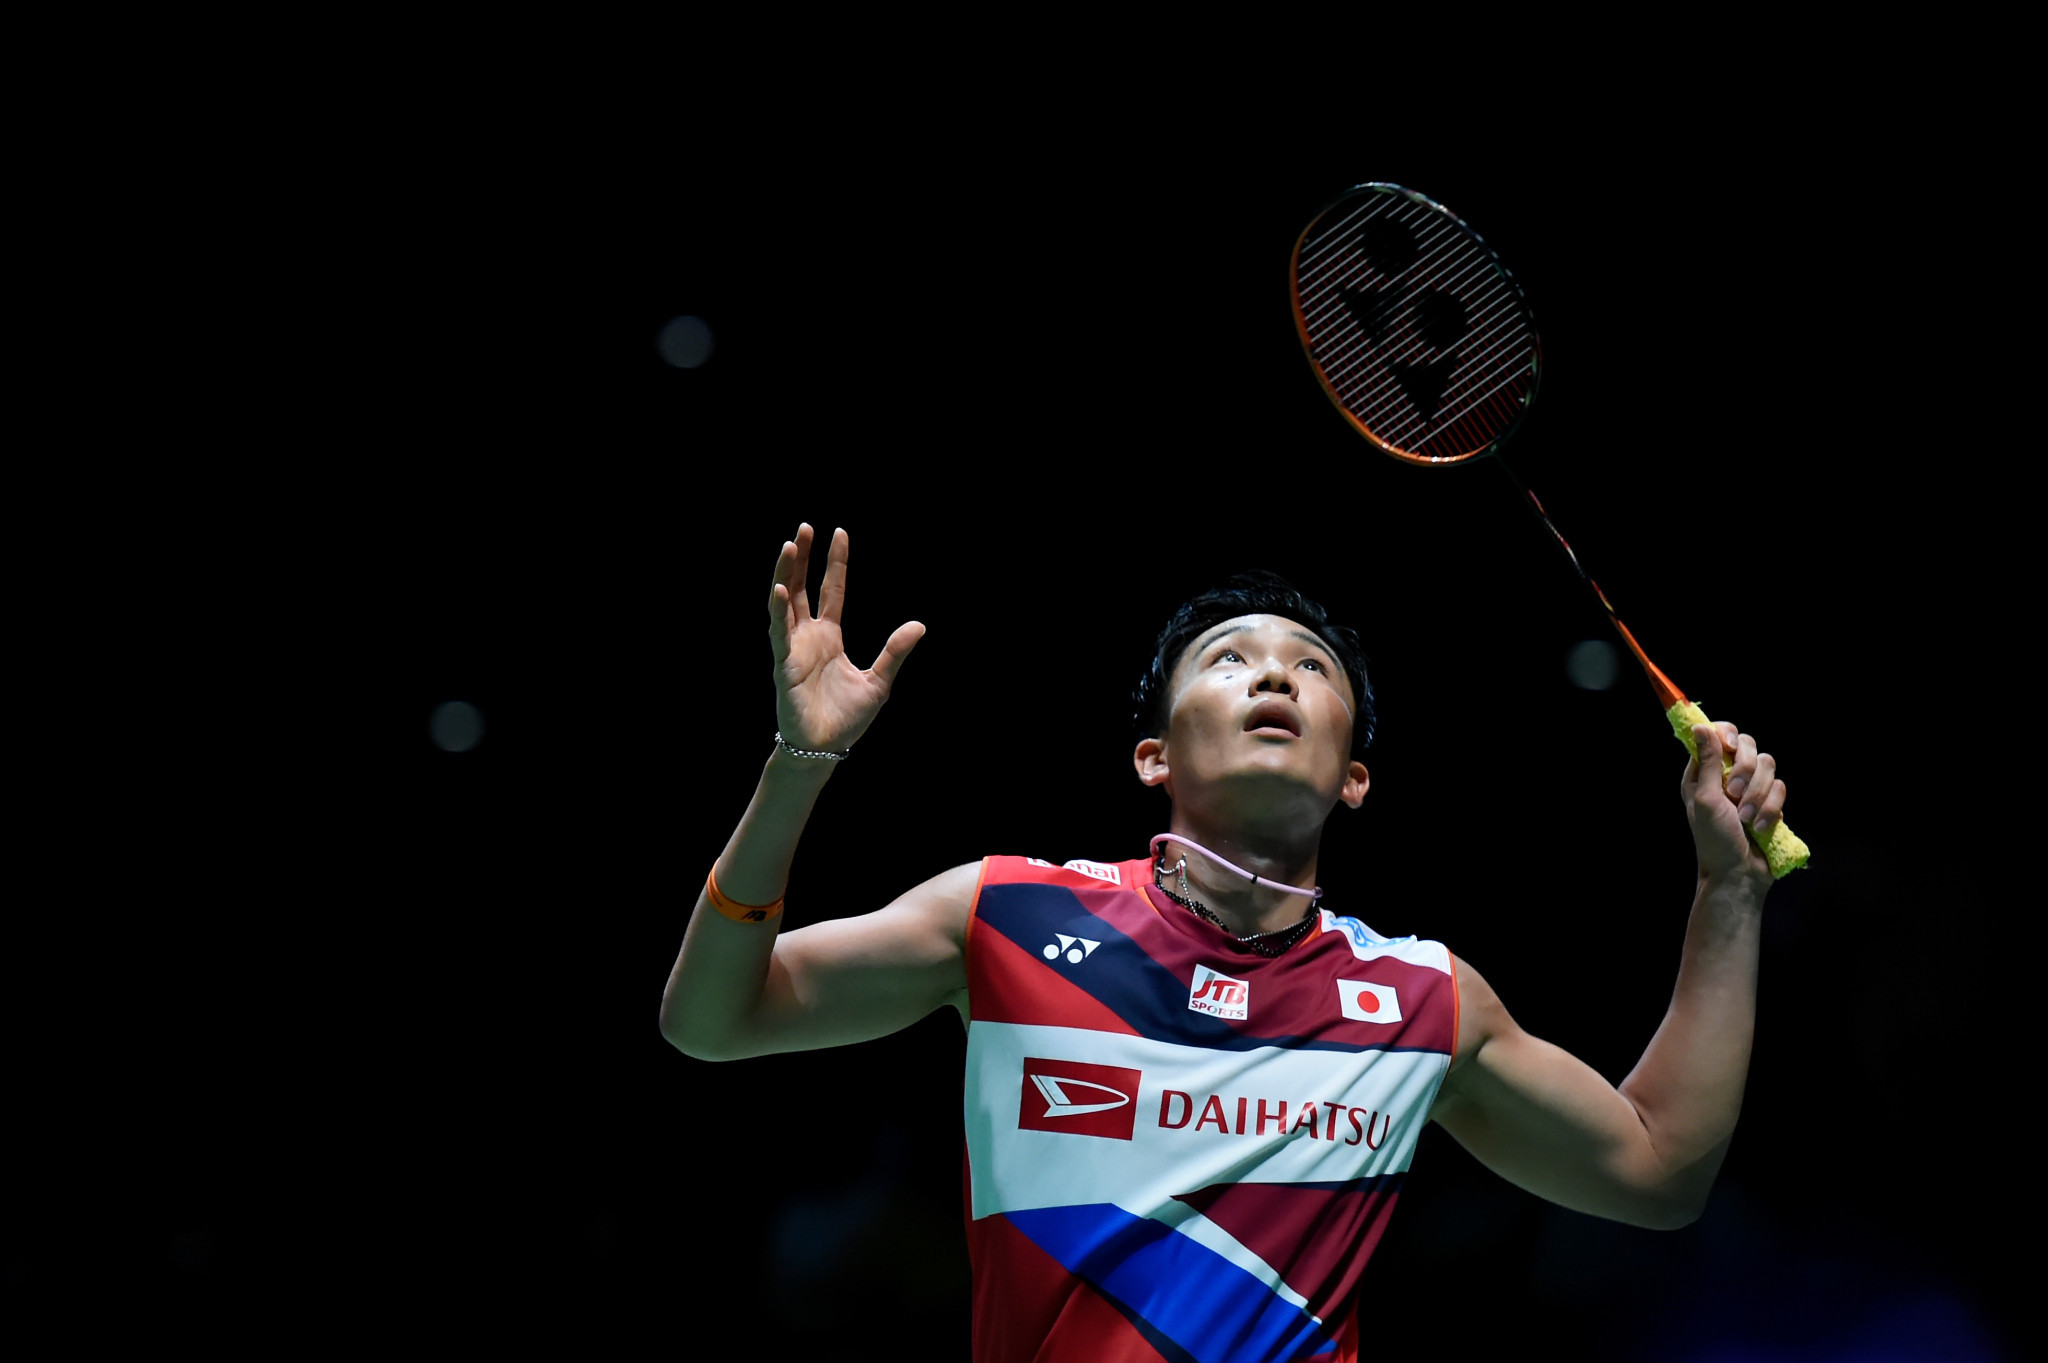 Home hero Momota marches on at BWF Japan Open and Tokyo 2020 test event